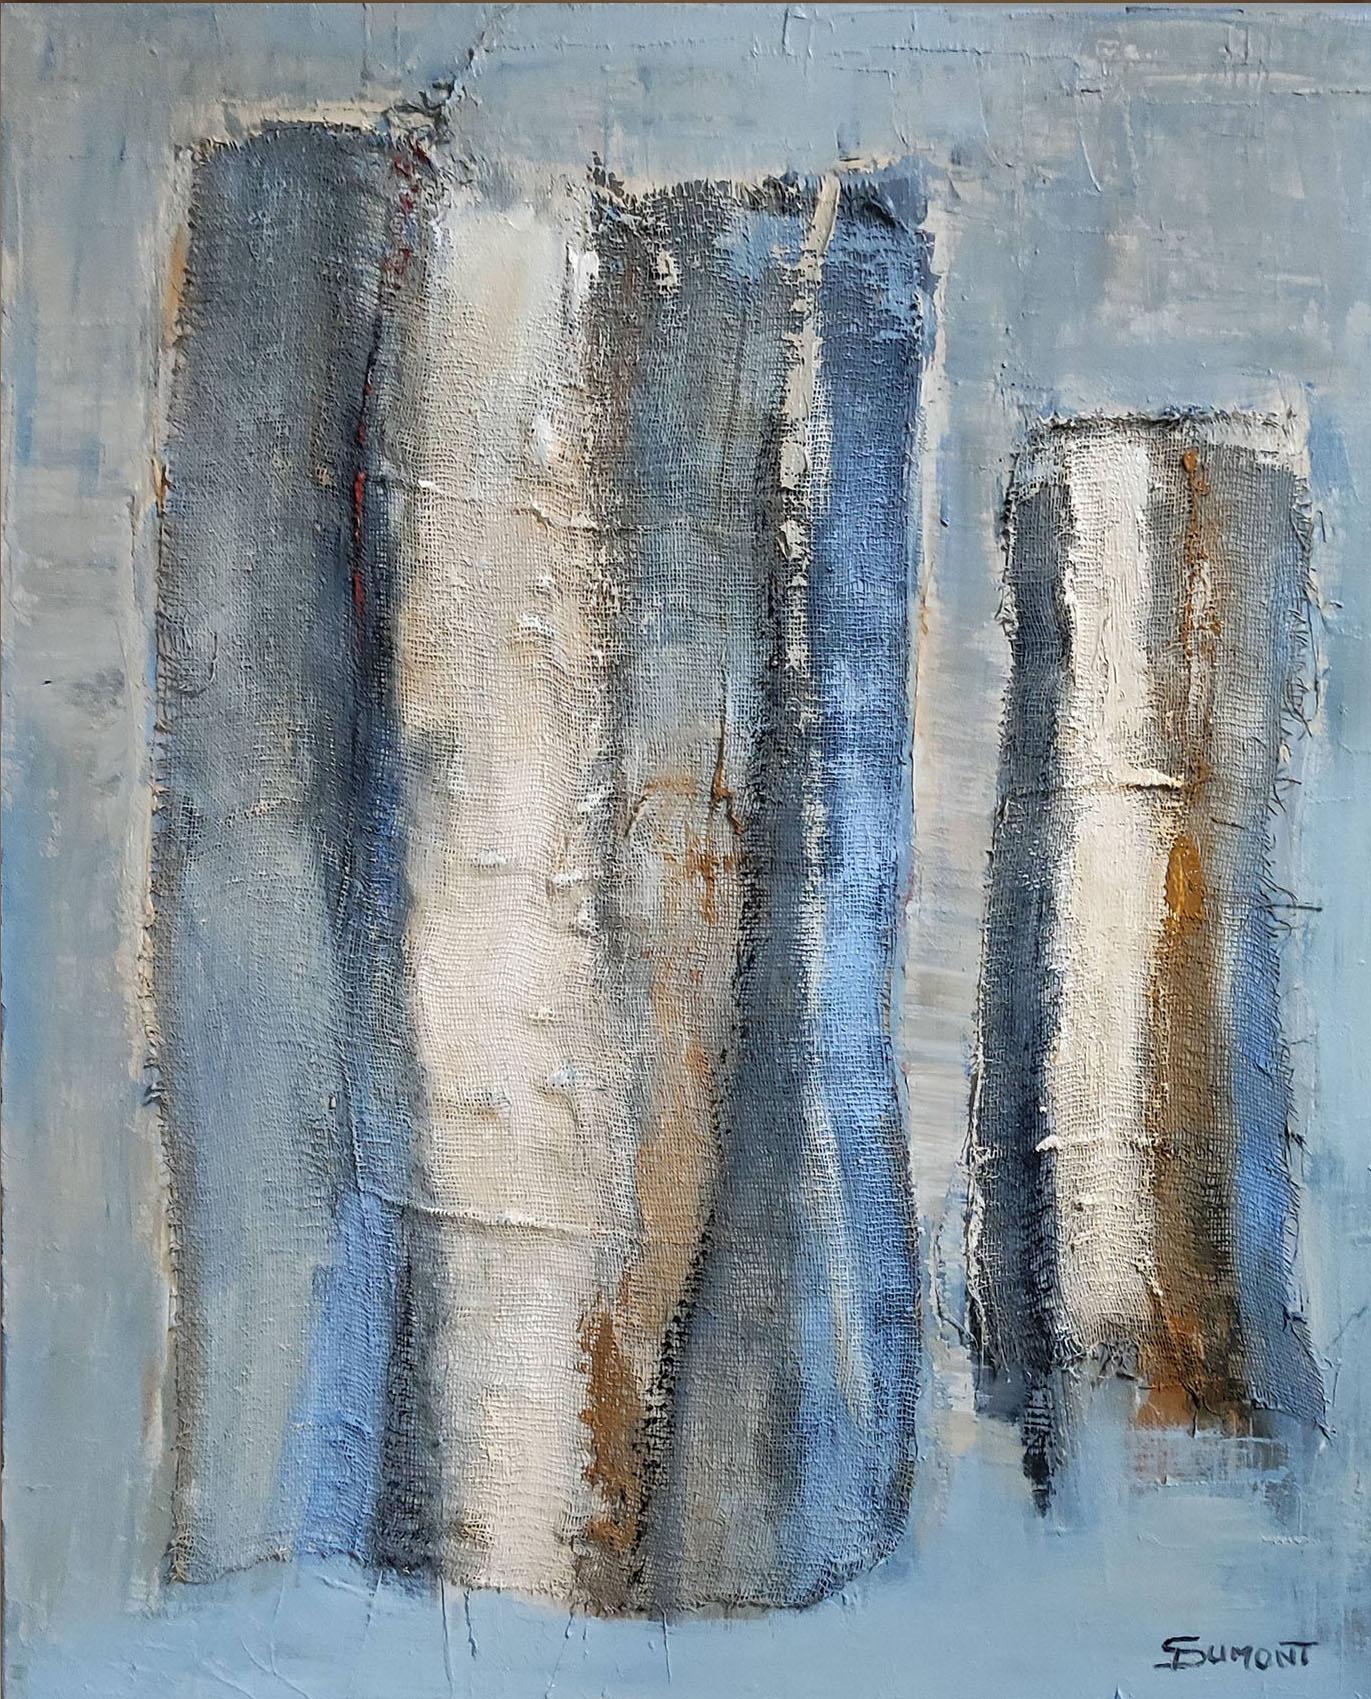 Abstract composition in blue tones in oil and knife with the addition of fabric.
Dimensions with frame 50 x 42 cm (19.68 x 16.52 inches)
The abstract of Sophie DUMONT is not a concept, it is an approach where each canvas is built around a graphic